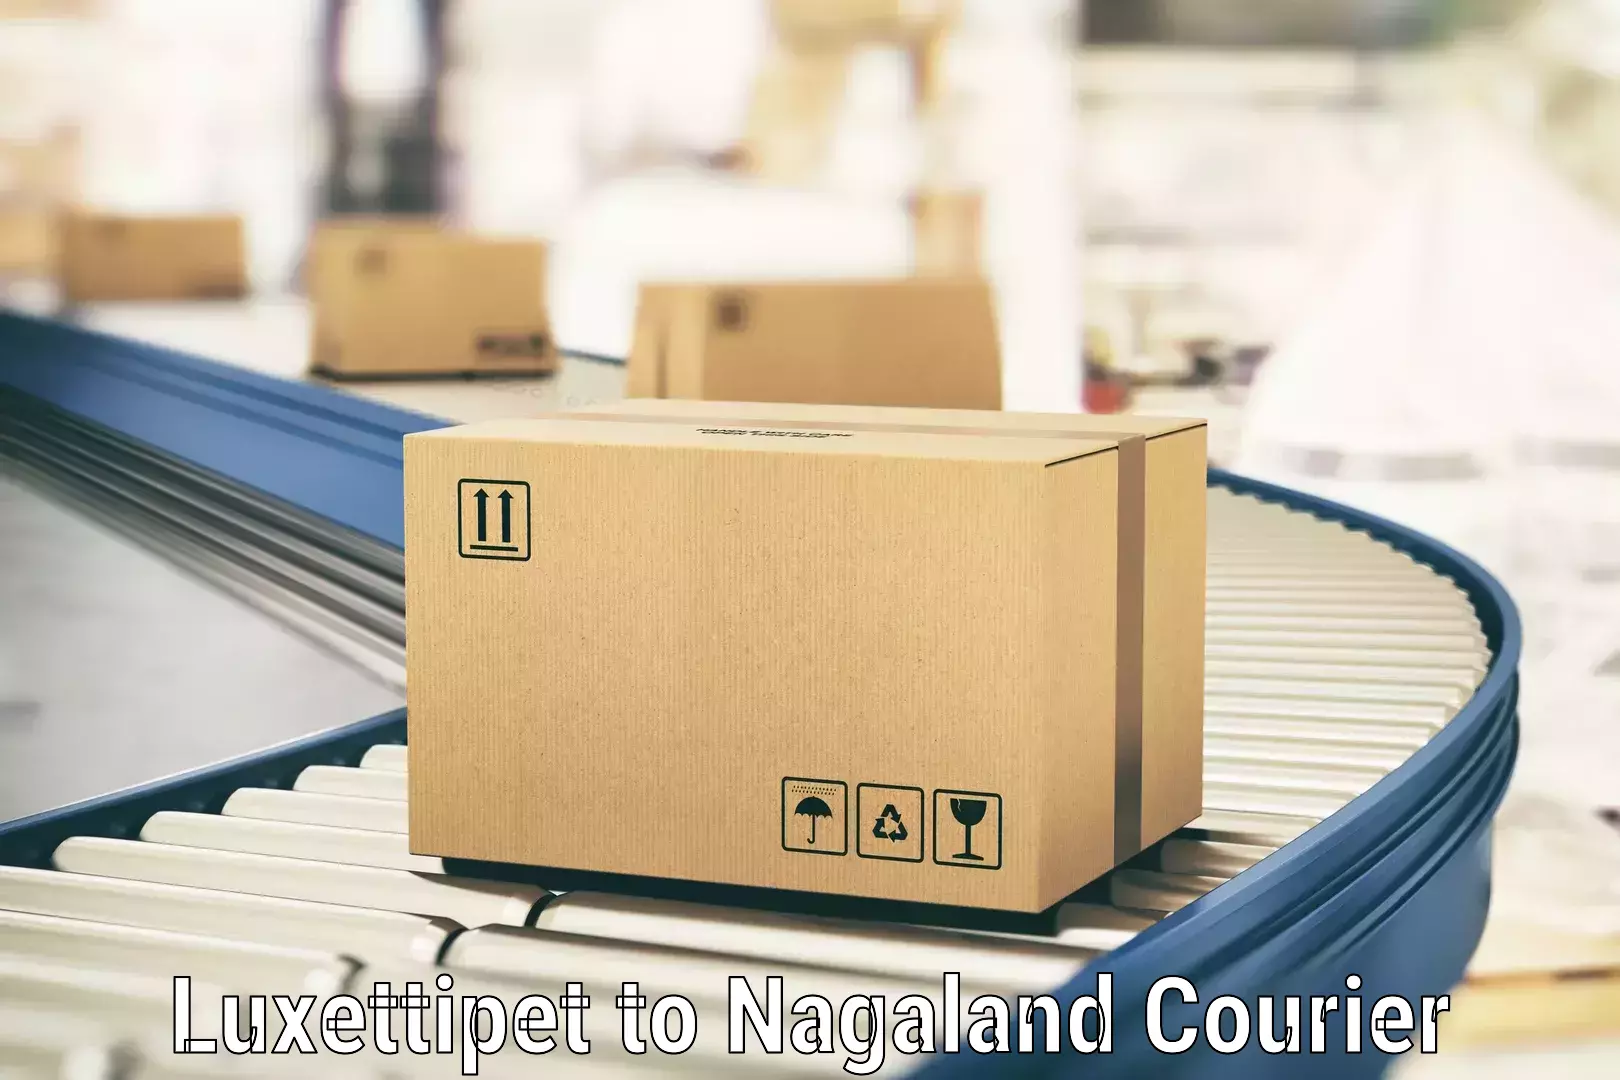 Express courier capabilities Luxettipet to Nagaland